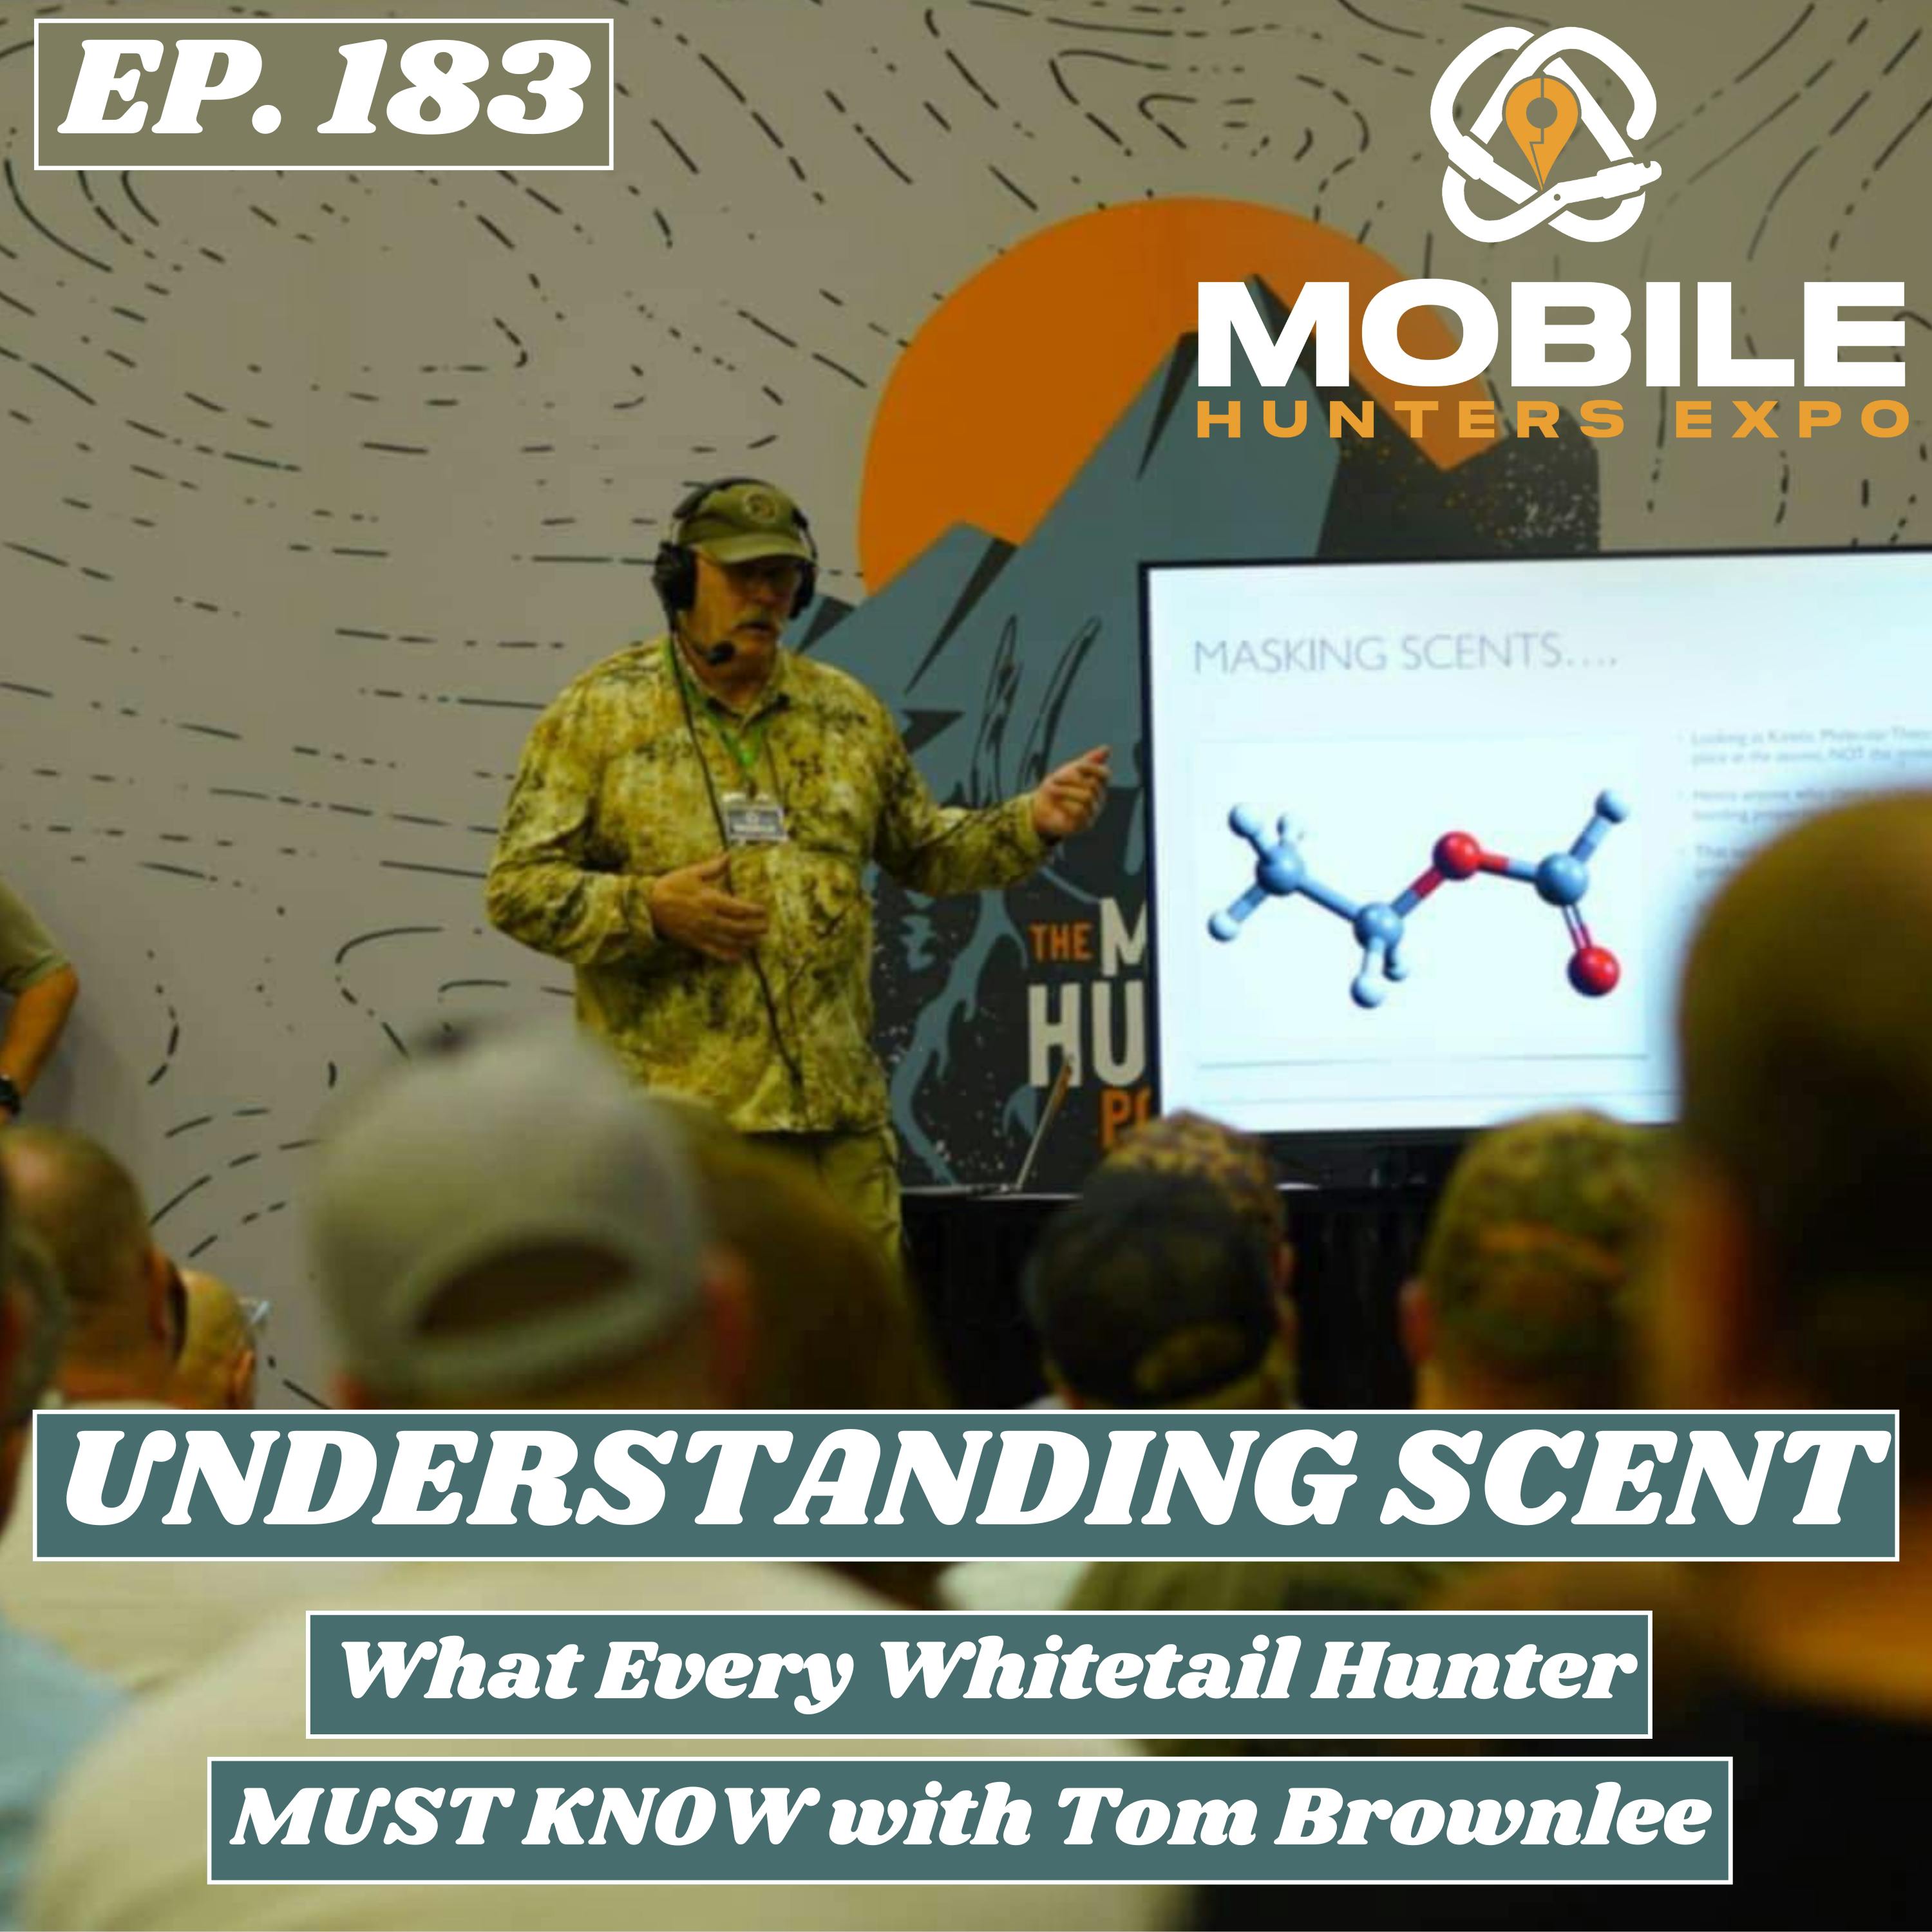 A Mobile Hunter Expo Exclusive: Understanding Scent: What Every Whitetail Hunter MUST KNOW With Tom Brownlee